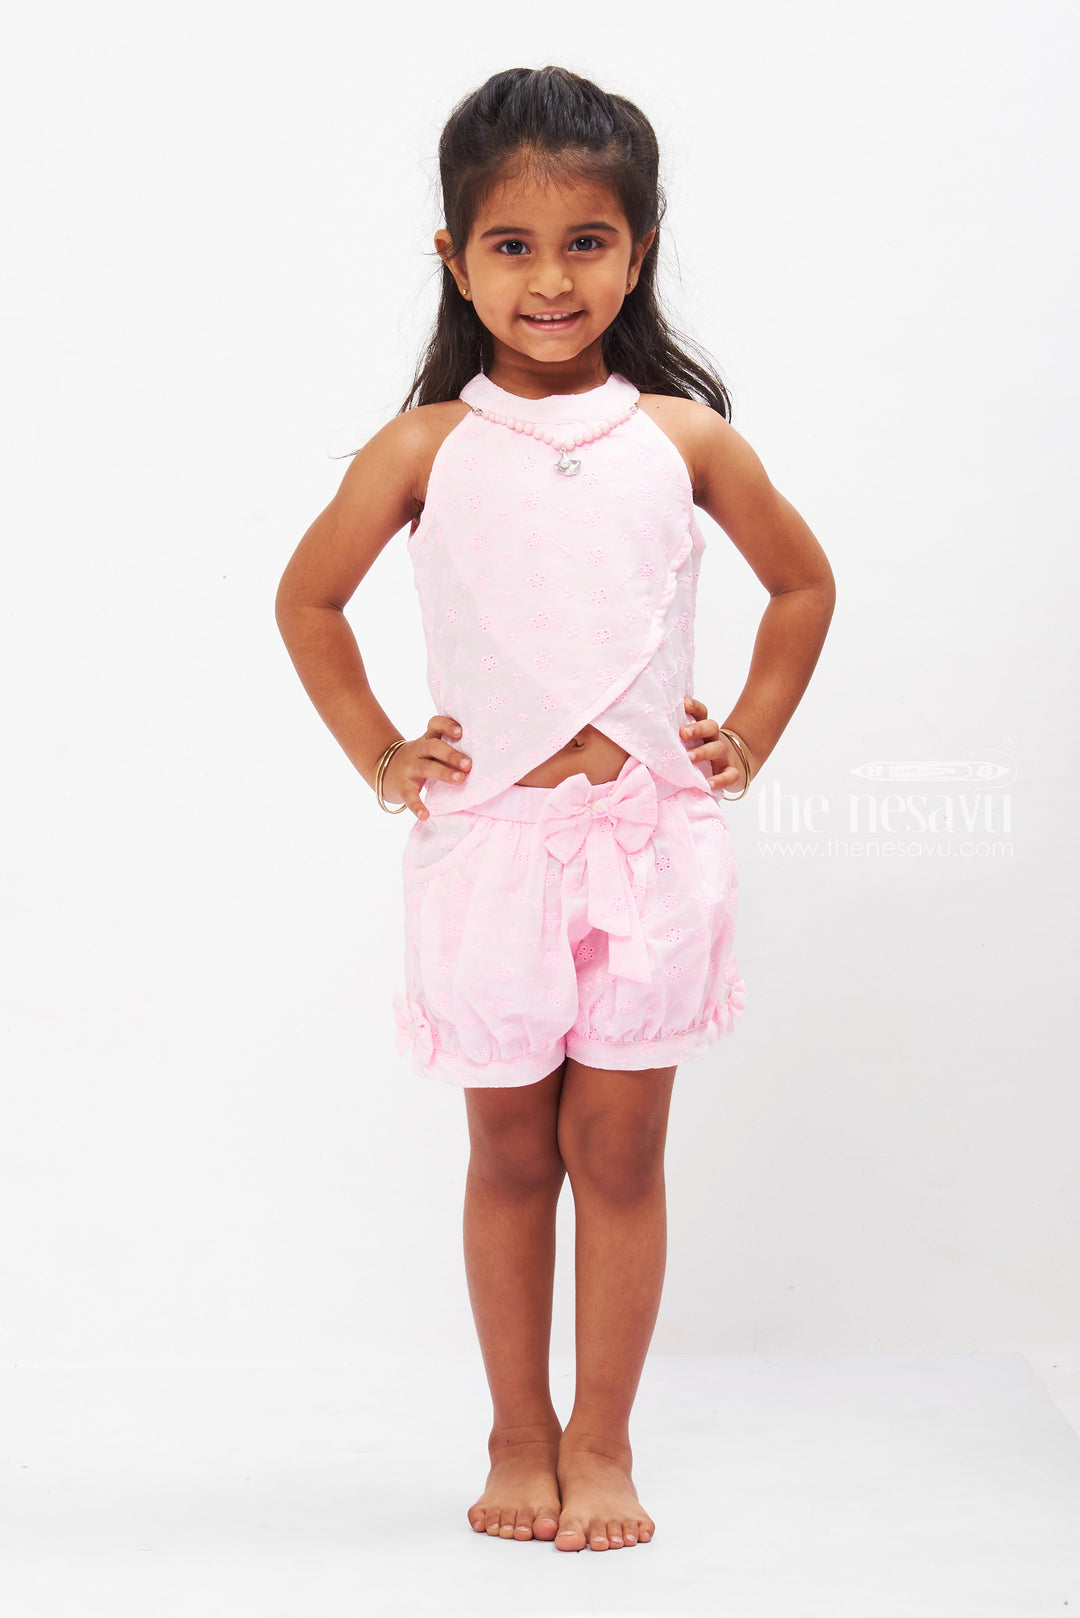 The Nesavu Baby Casual Sets Sweet Pink Embroidered Top and Shorts Set for Girls Nesavu 18 (2Y) / Pink BFJ513B-18 Girls Pink Embroidered Outfit Set | Floral Sleeveless Top | Ruffled Shorts | The Nesavu